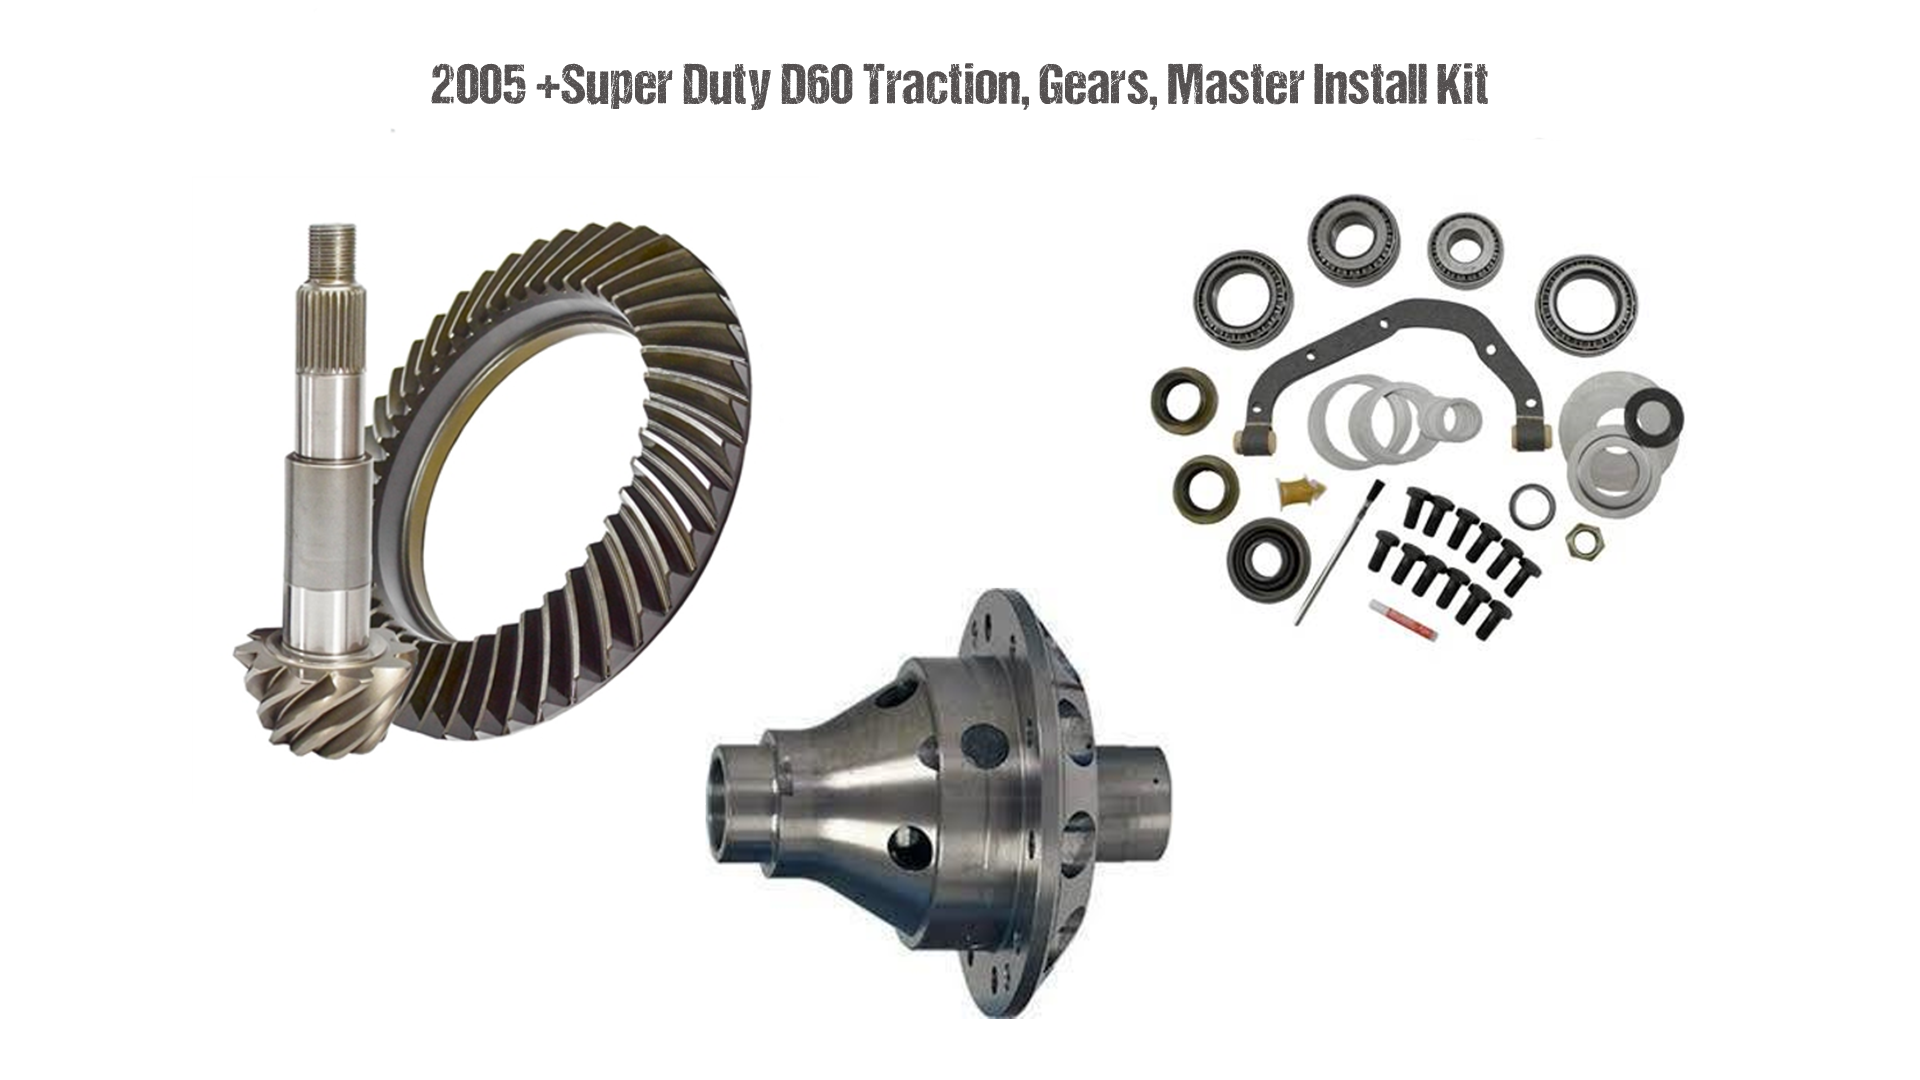 2005+ Super Duty D60 Traction, Gears, Master Install Kit - fusion4x4